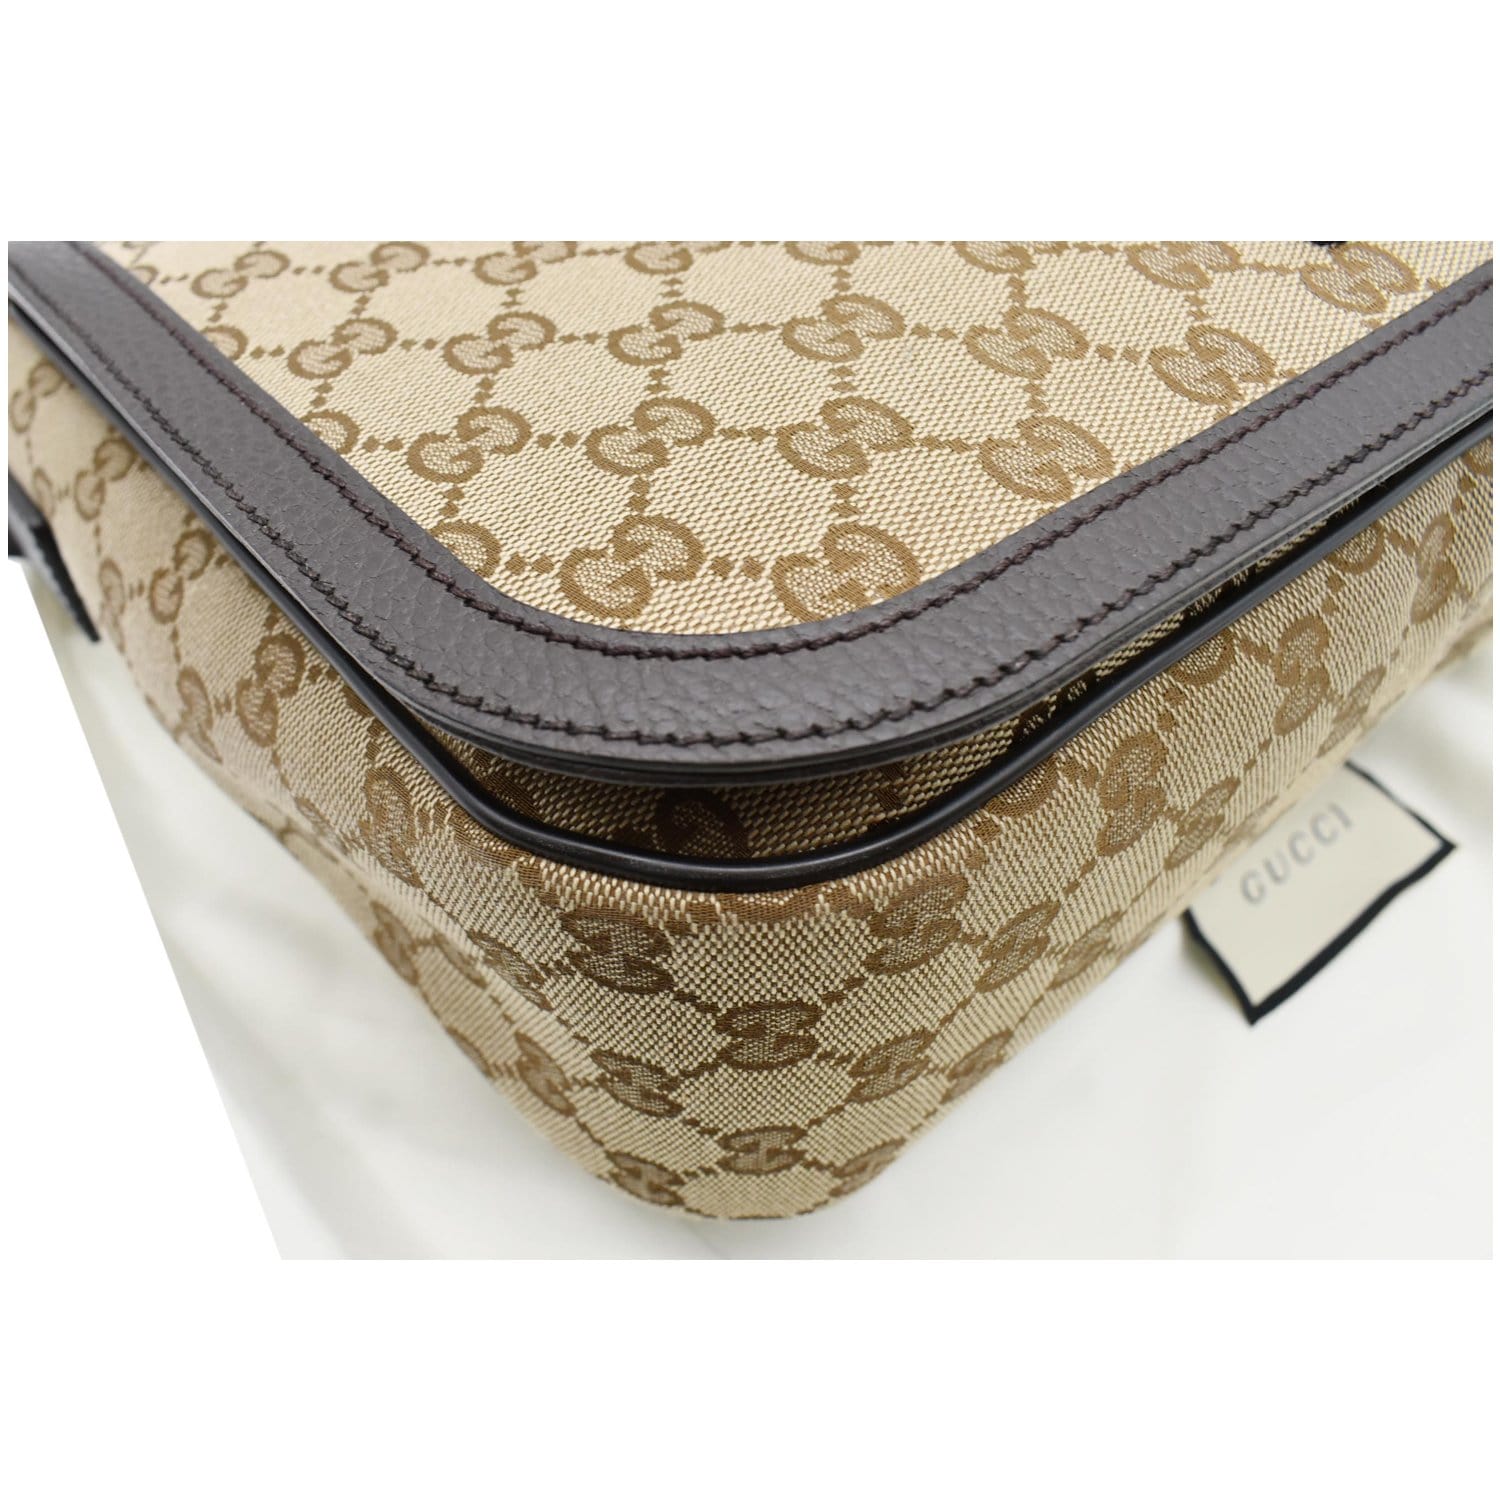 Gucci Beige GG fabric Small Messenger Bag ($410) ❤ liked on